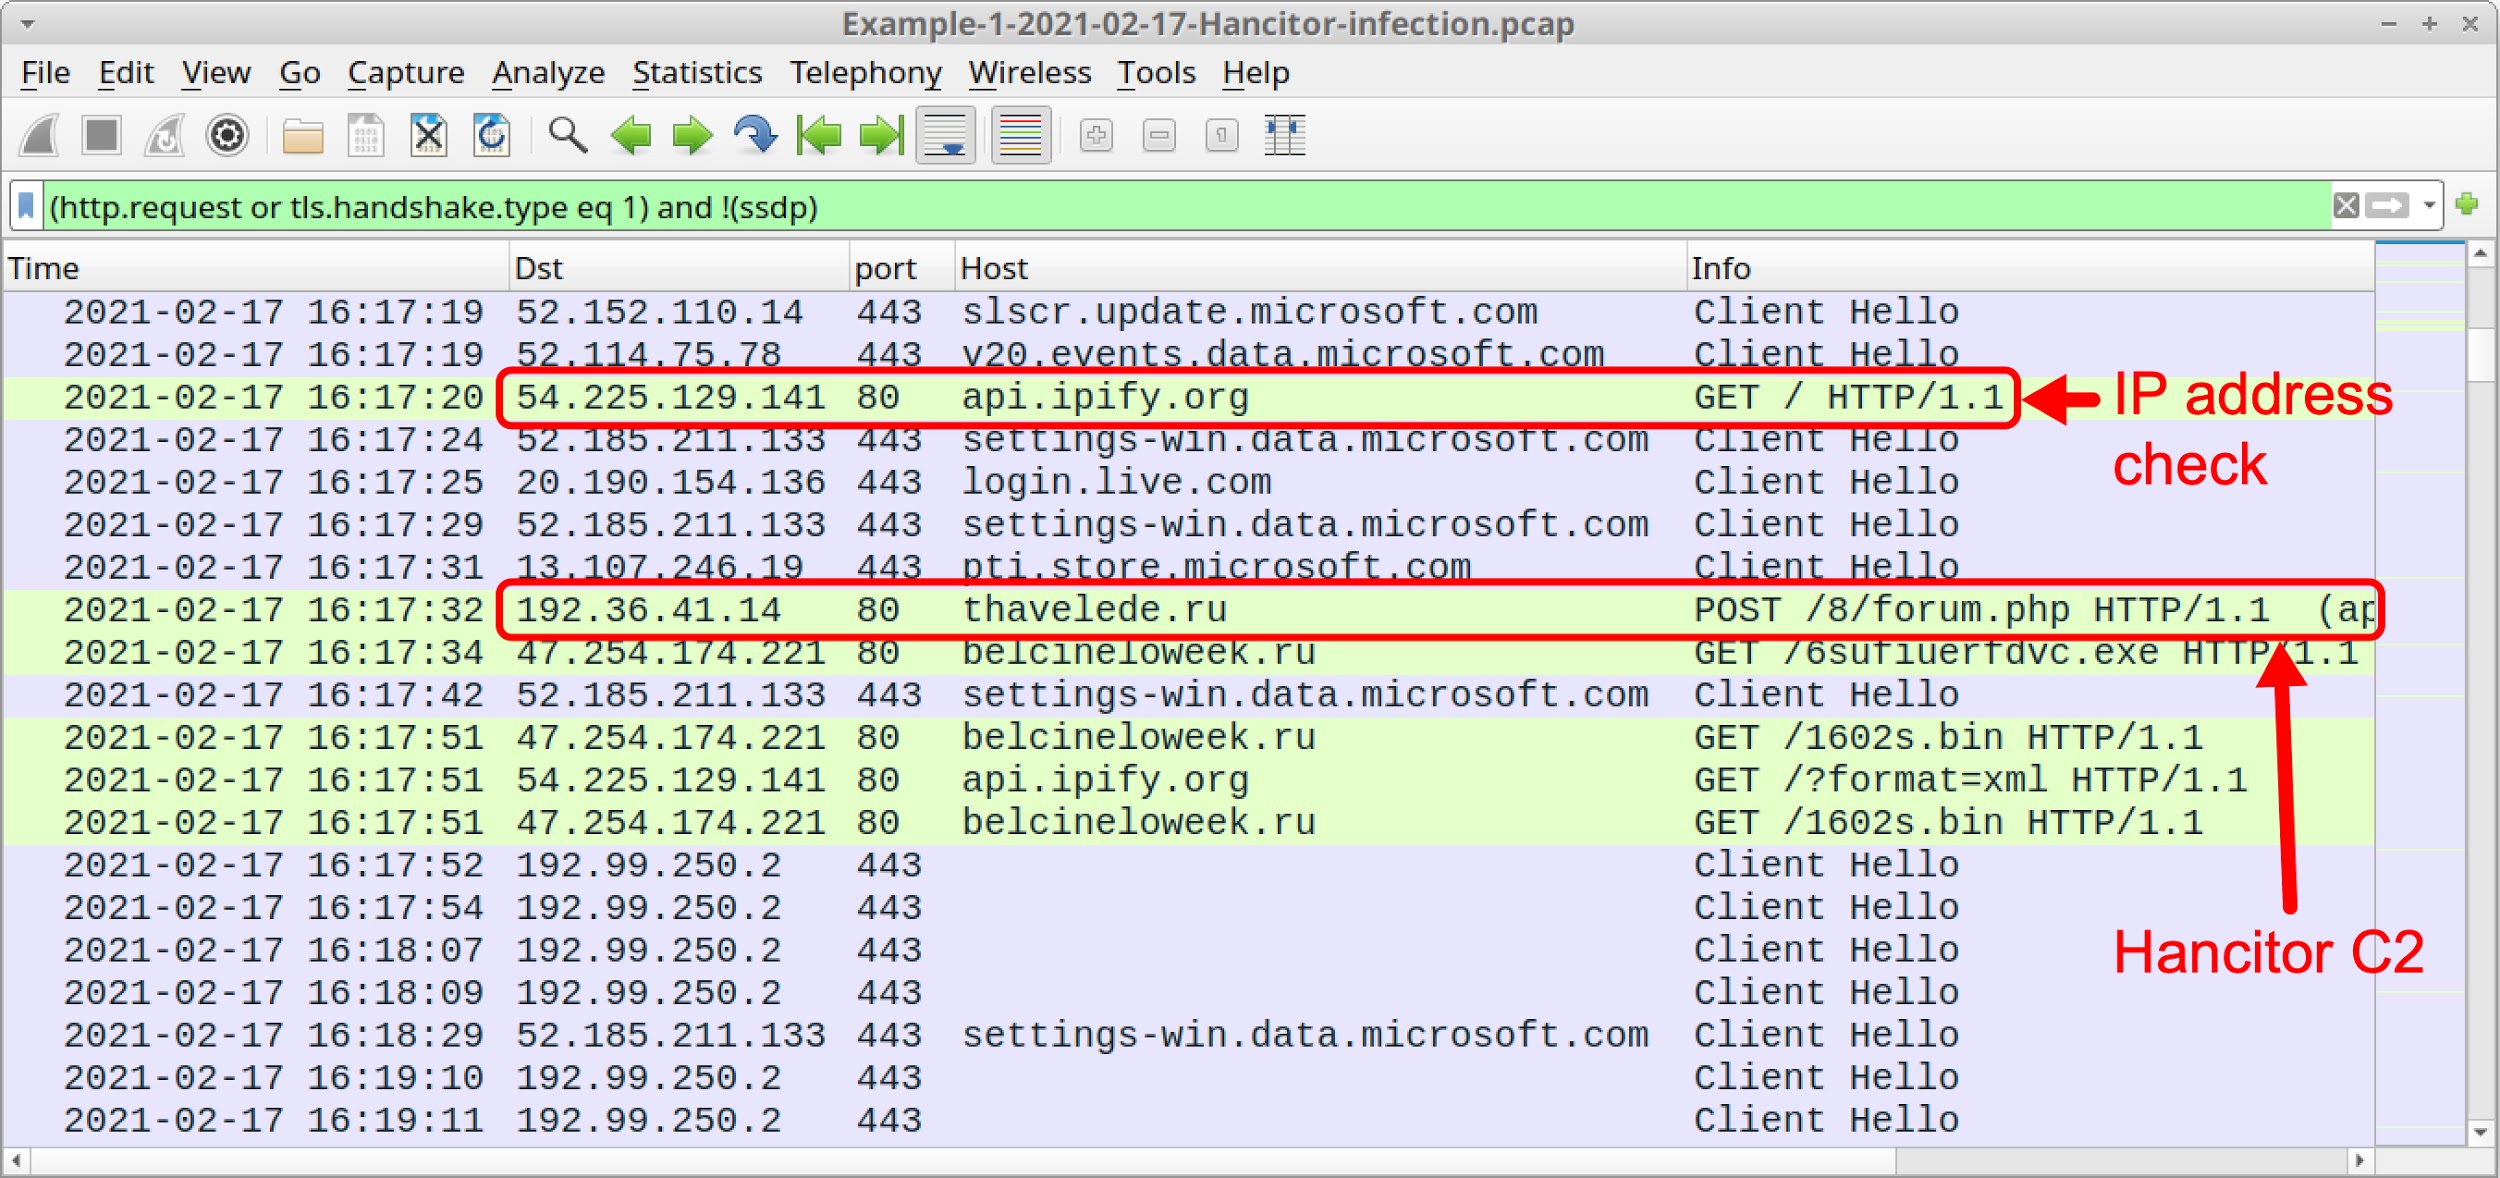 Red arrows indicate where in the Wireshark column display the IP address check and the Hancitor C2 traffic are shown. 